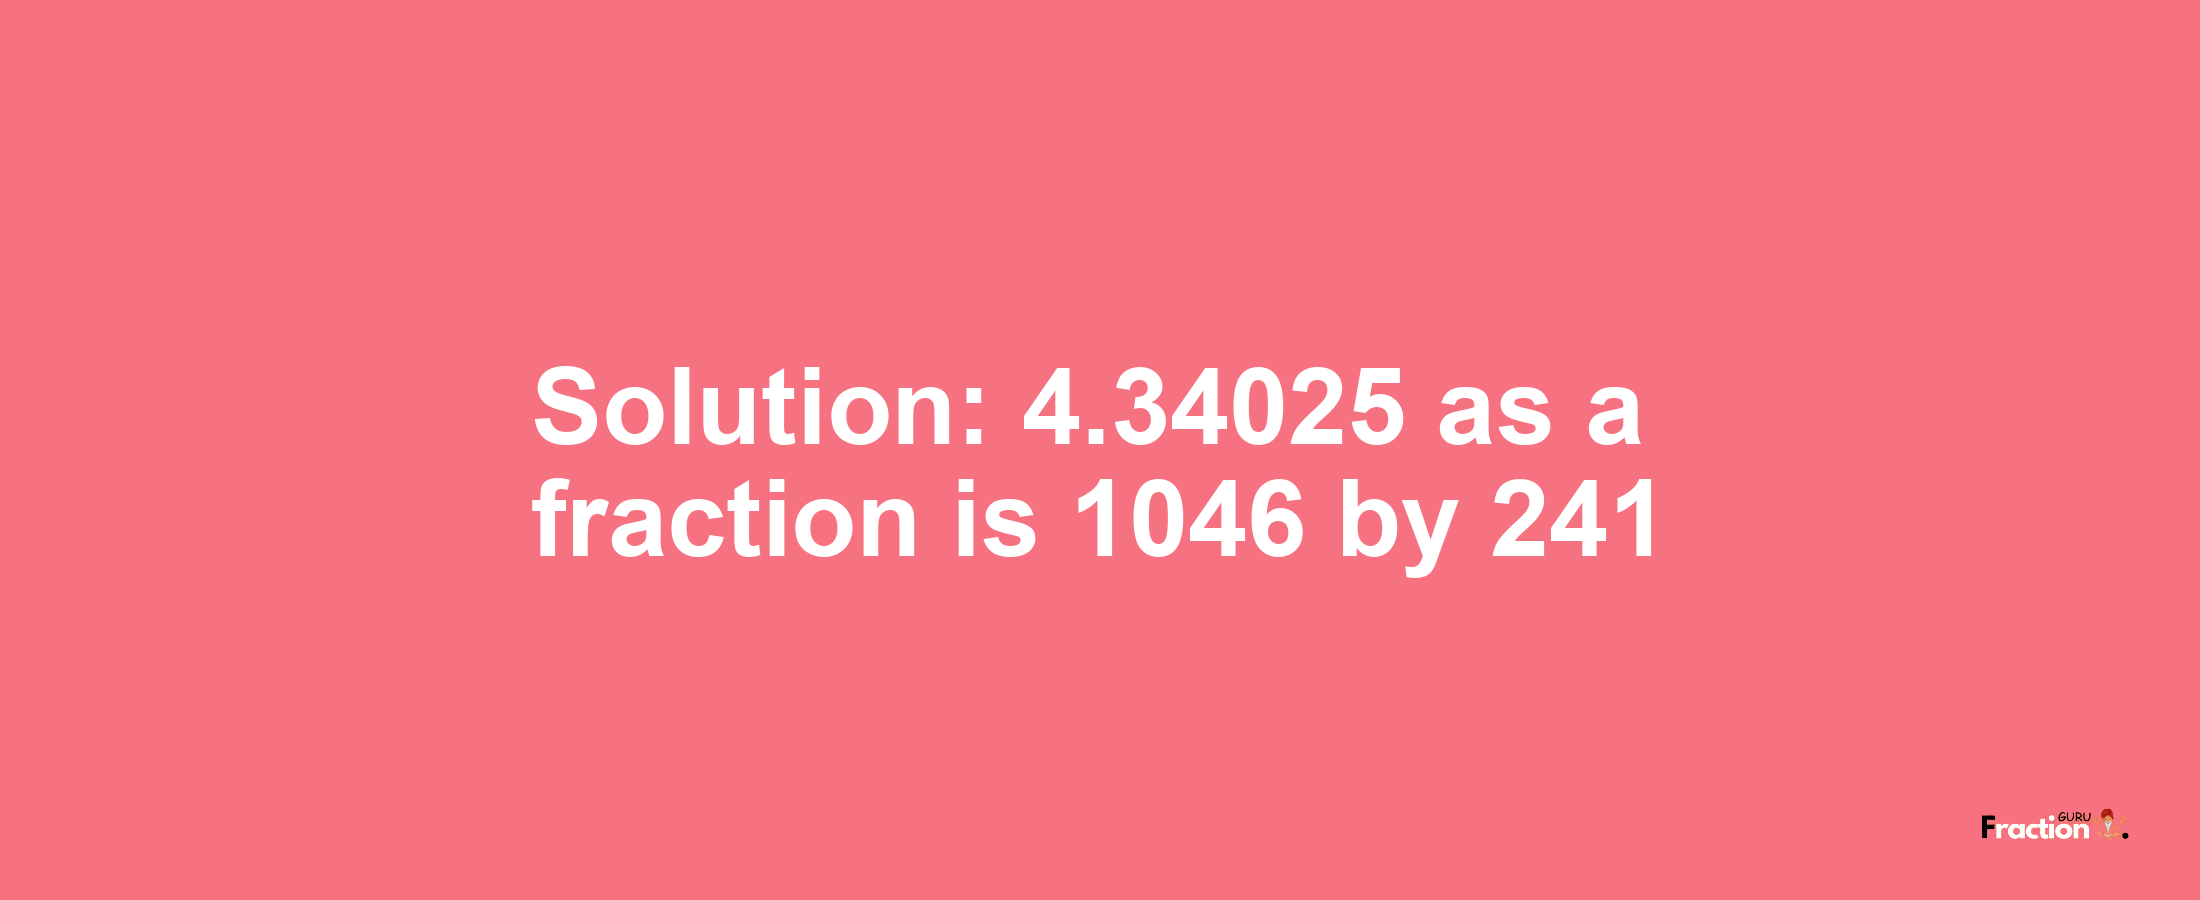 Solution:4.34025 as a fraction is 1046/241